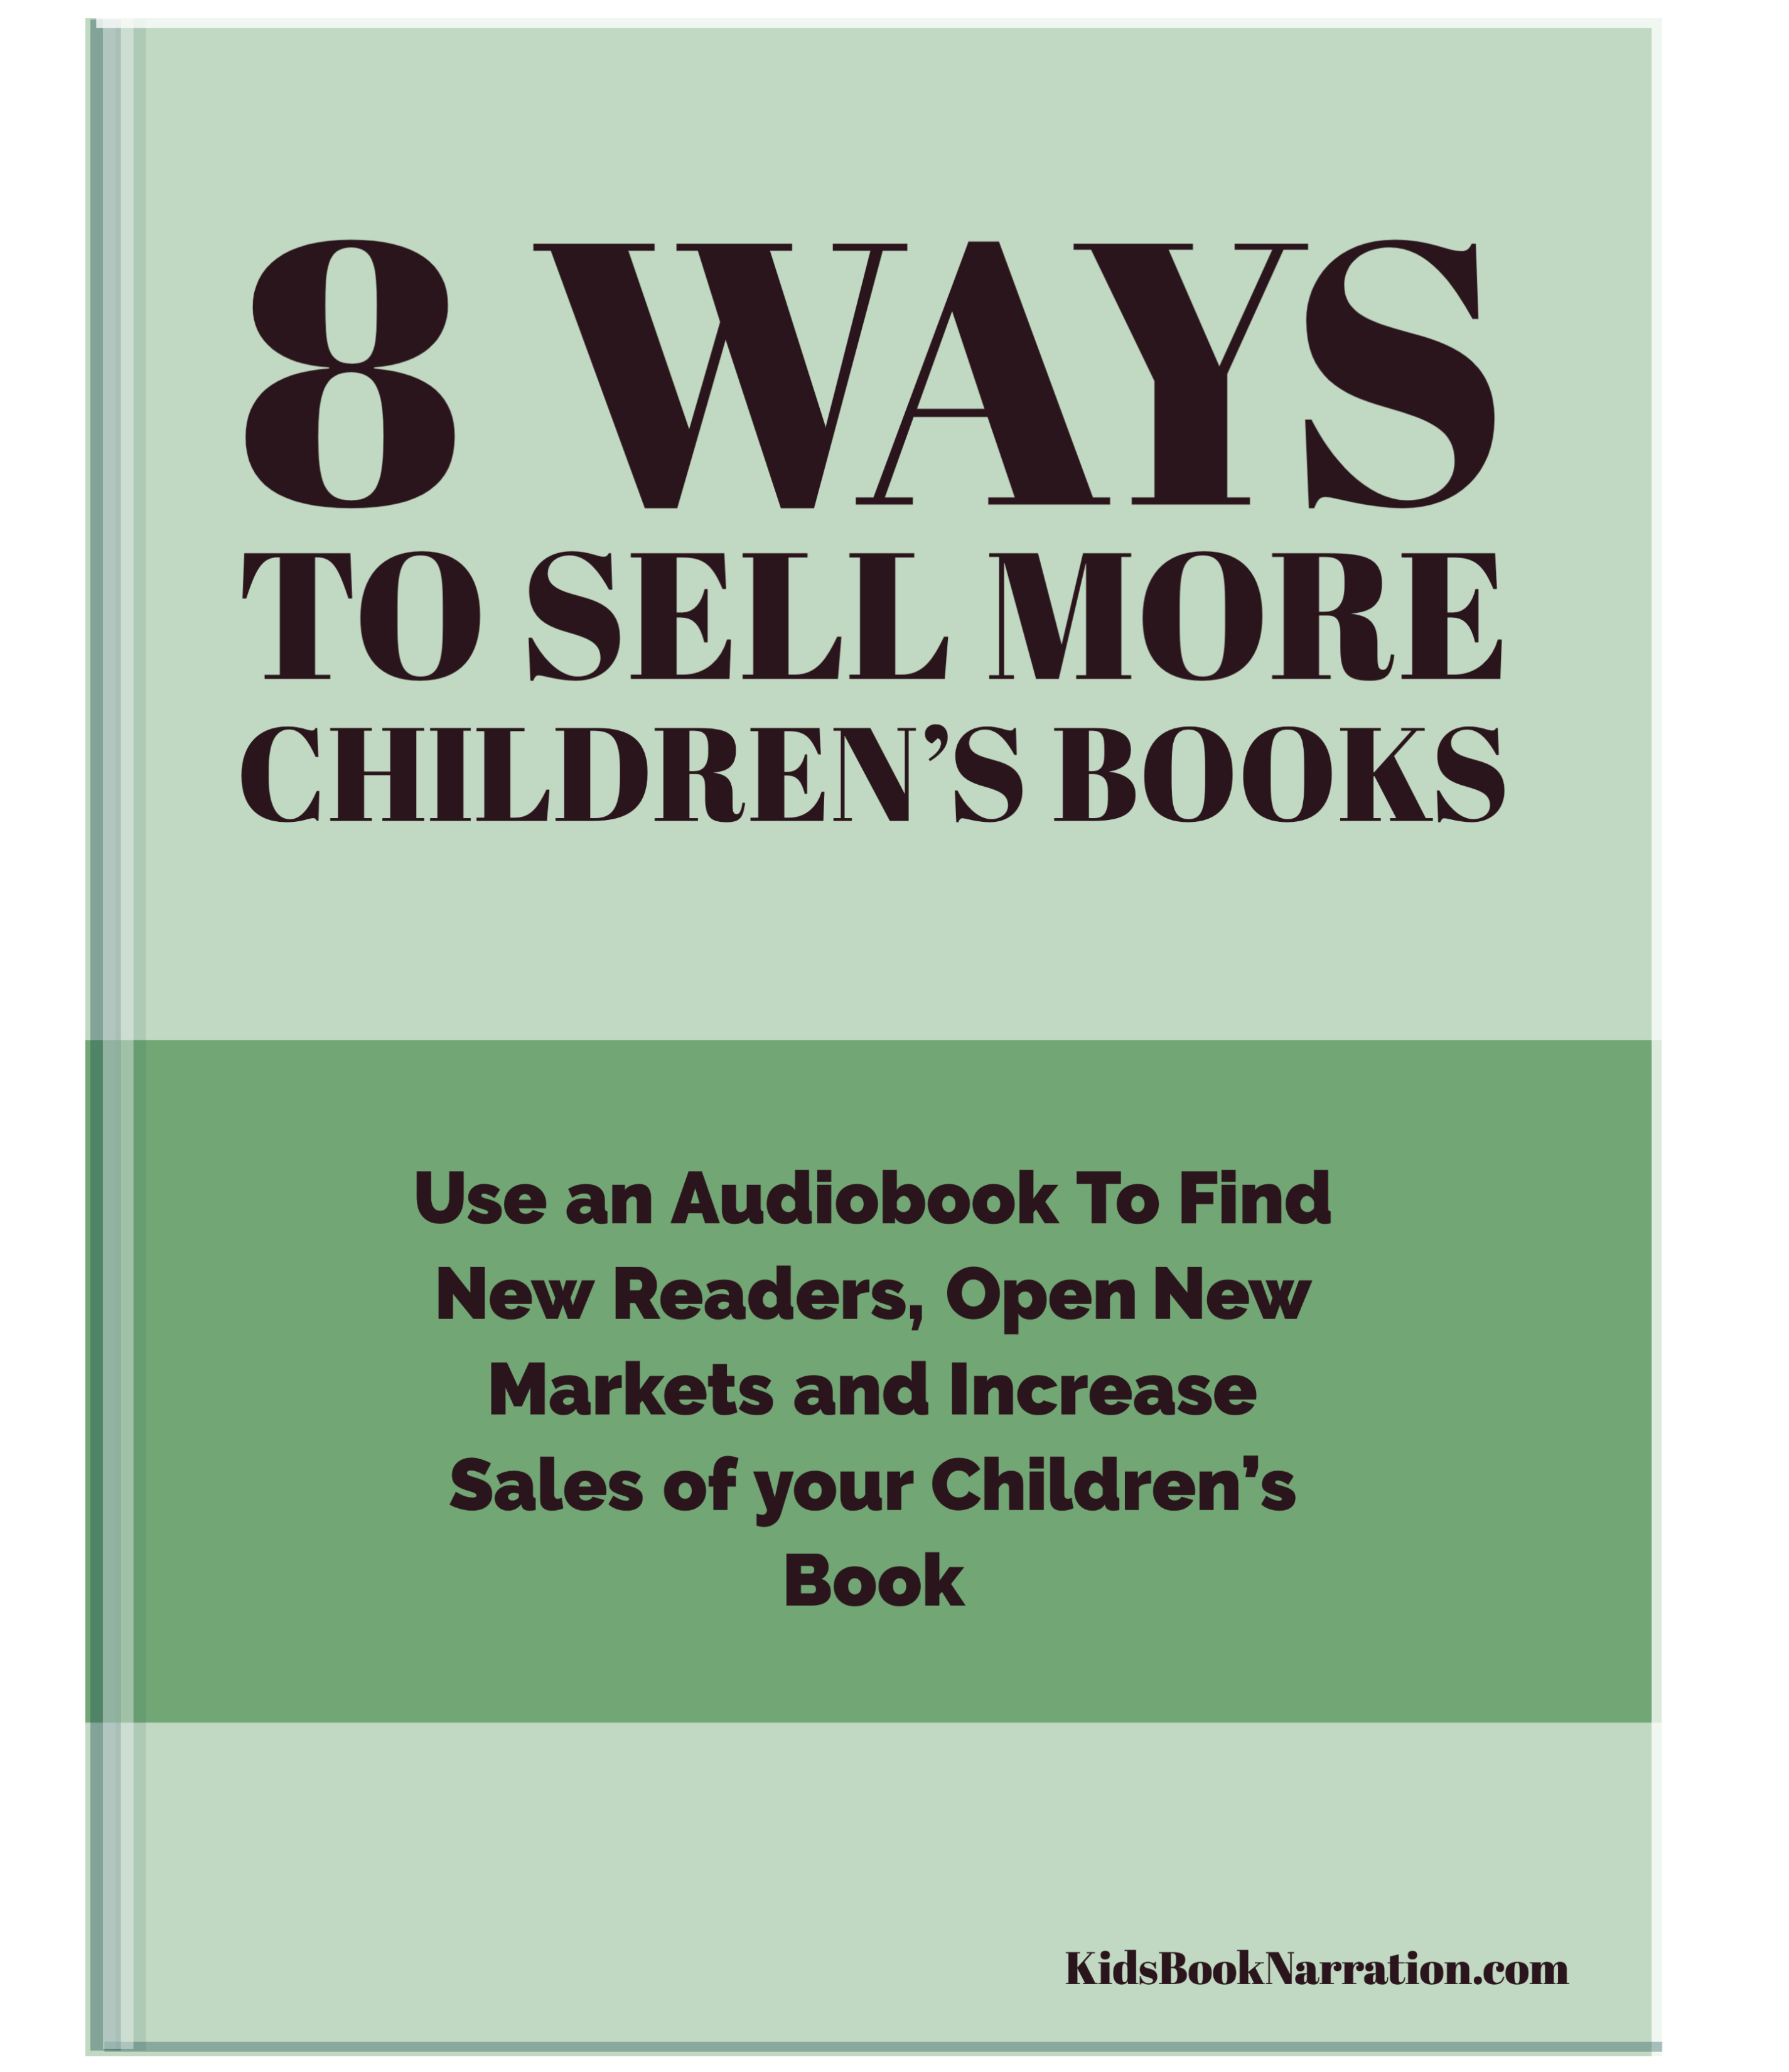 8 Ways To Sell More Children's Books Using an Audiobook!